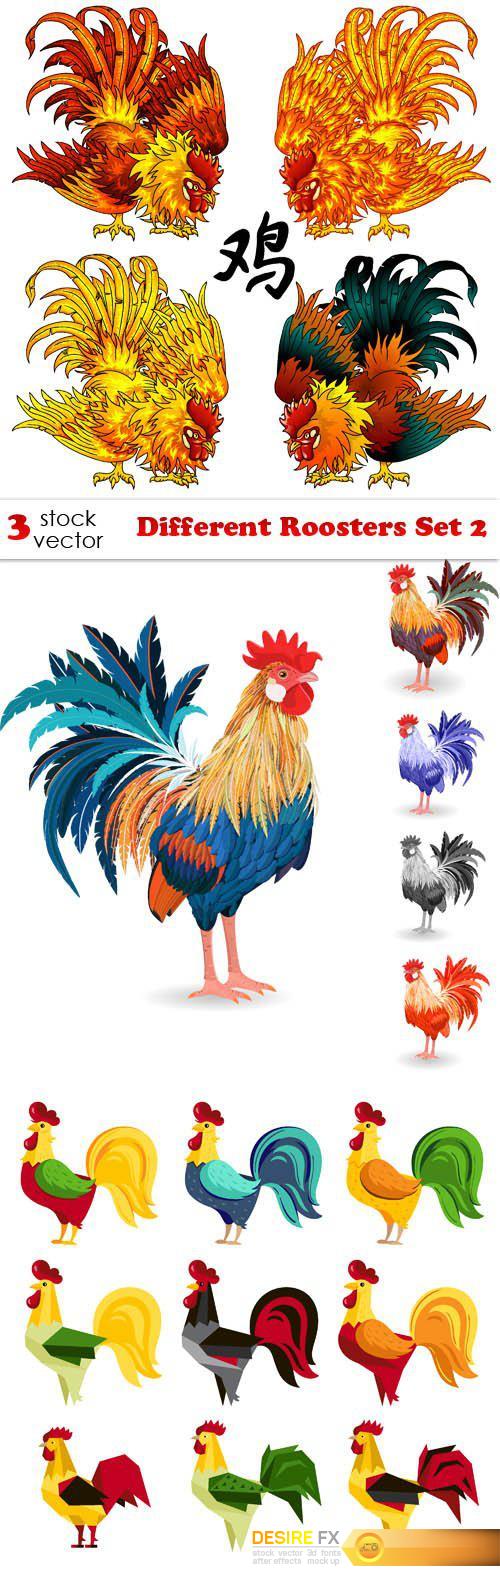 Vectors - Different Roosters Set 2